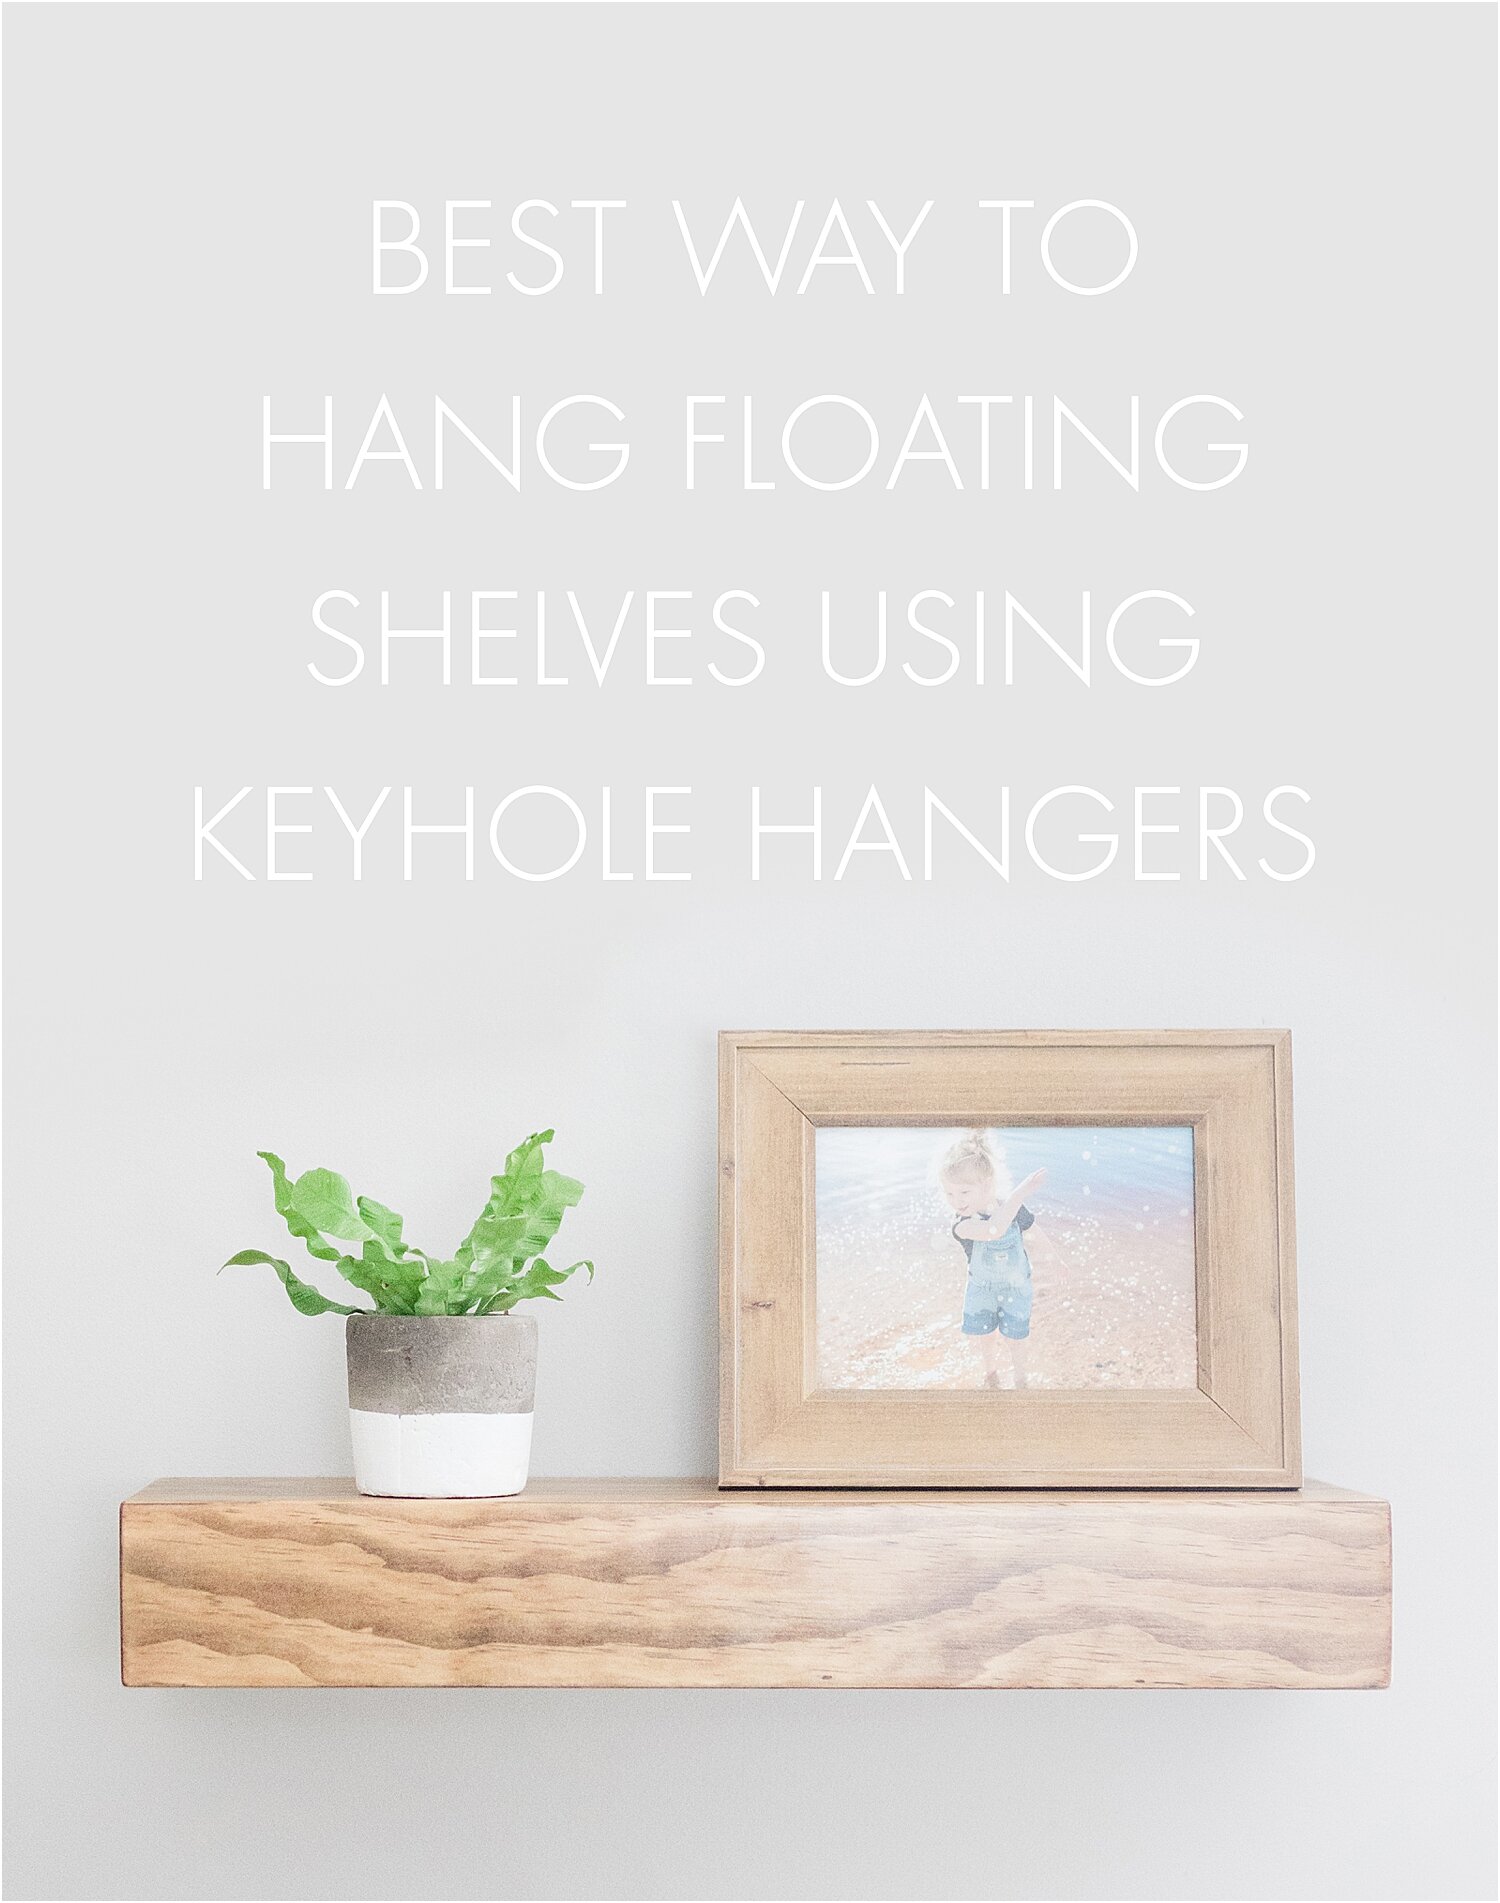 How To Hang Floating Shelves With, How Do You Hang Floating Shelves